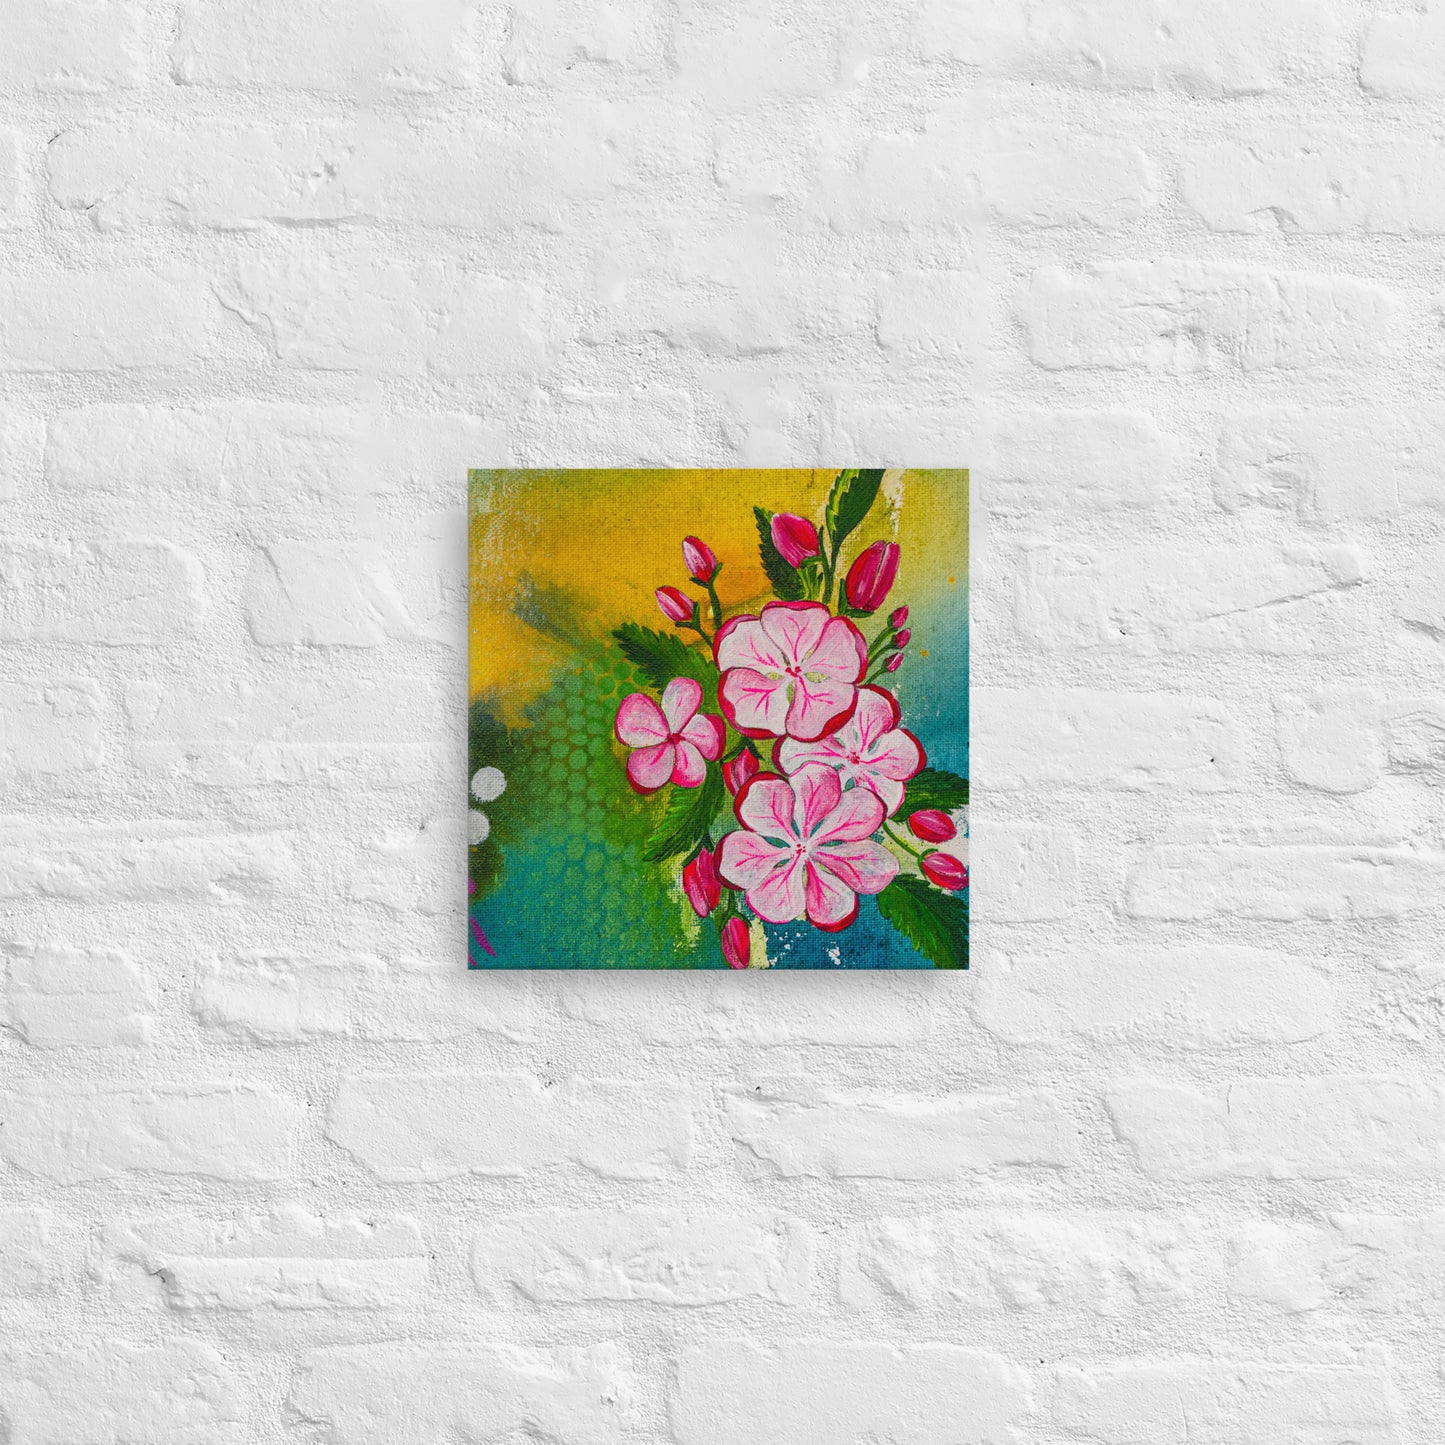 Flower Study (Cherry Blossom) - Mixed Media Printed Canvas